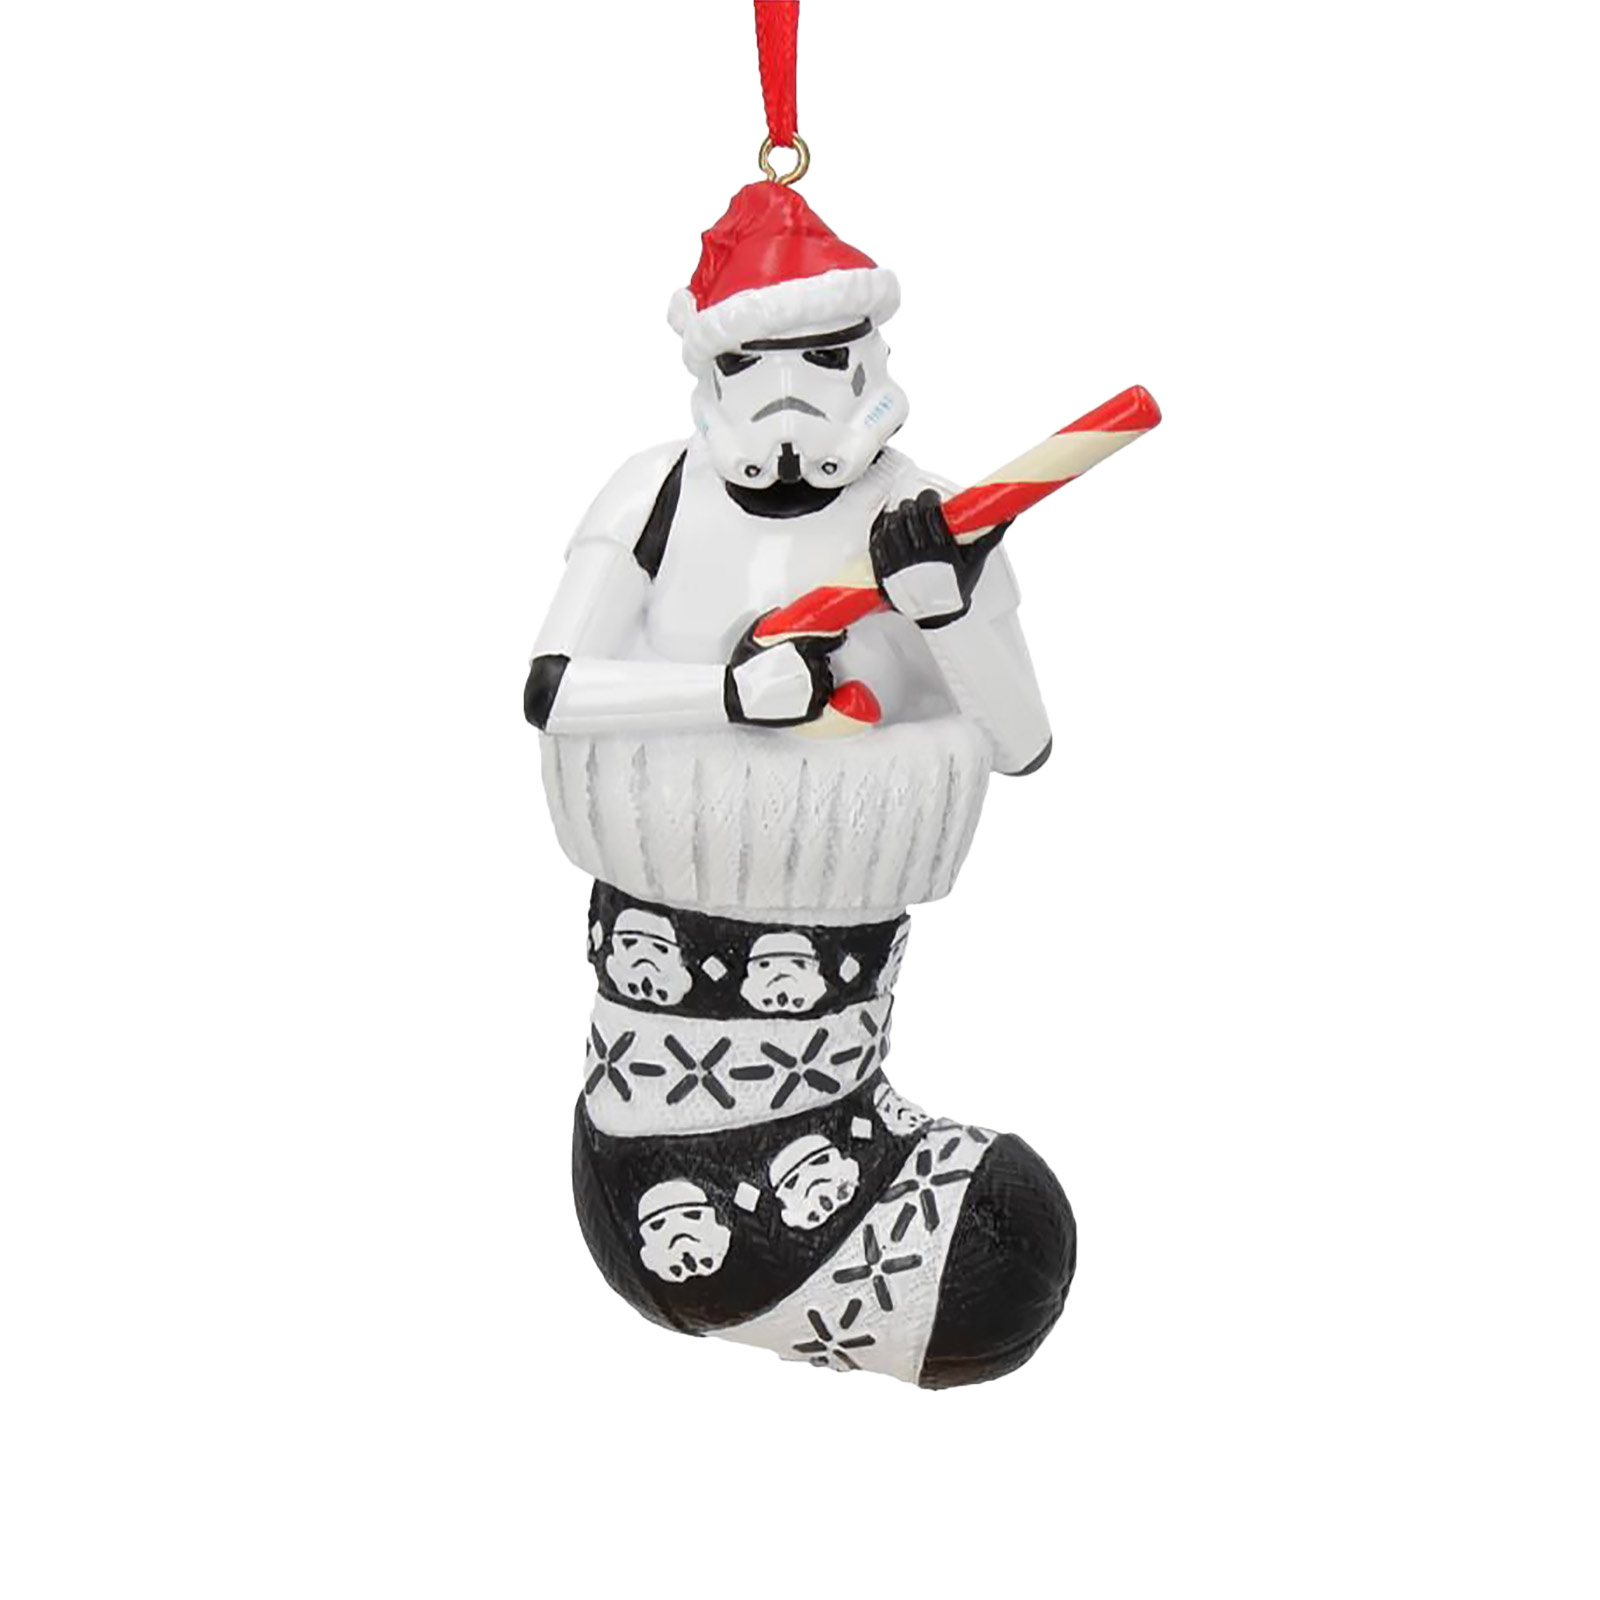 Stormtrooper in Christmas Stocking Christmas Tree Ornament - Star Wars